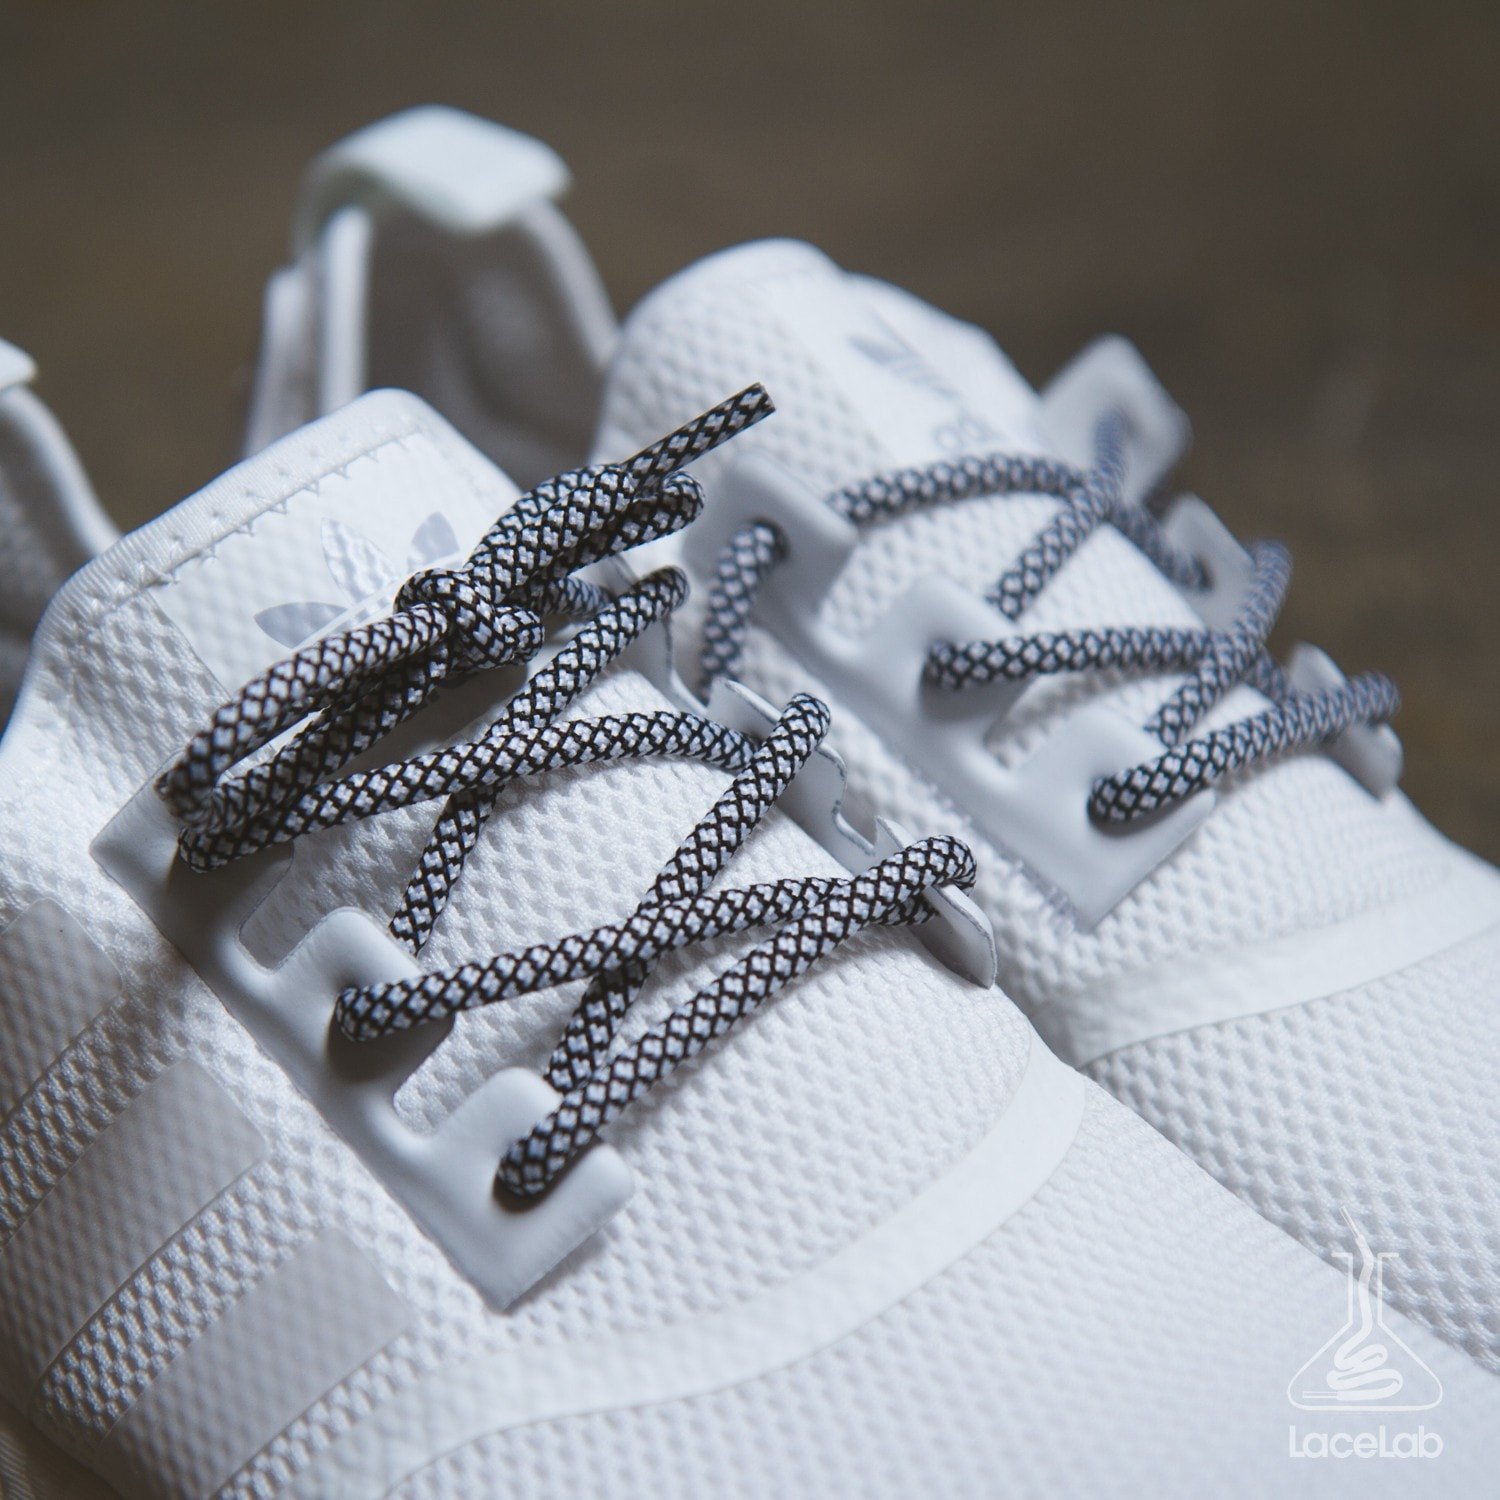 ultra boost rope laces